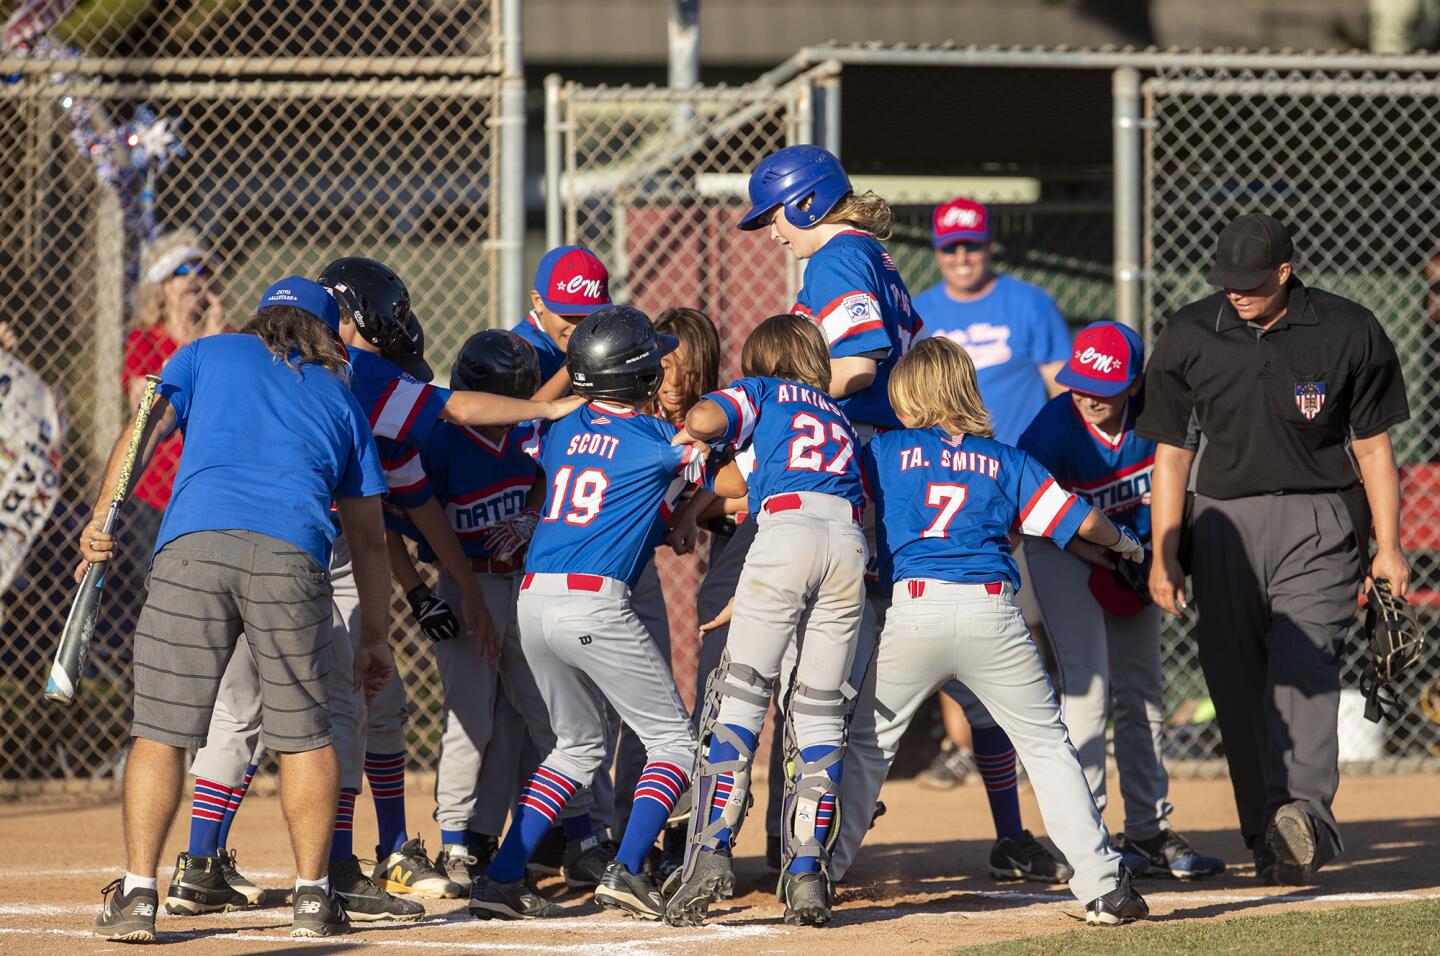 Costa Mesa National Little League's Peyton Thomas, center, is met by his teammates at the plate after he hit a solo walk-off homerun to beat Costa Mesa American Little League in the Mayor's Cup on Thursday, July 11.